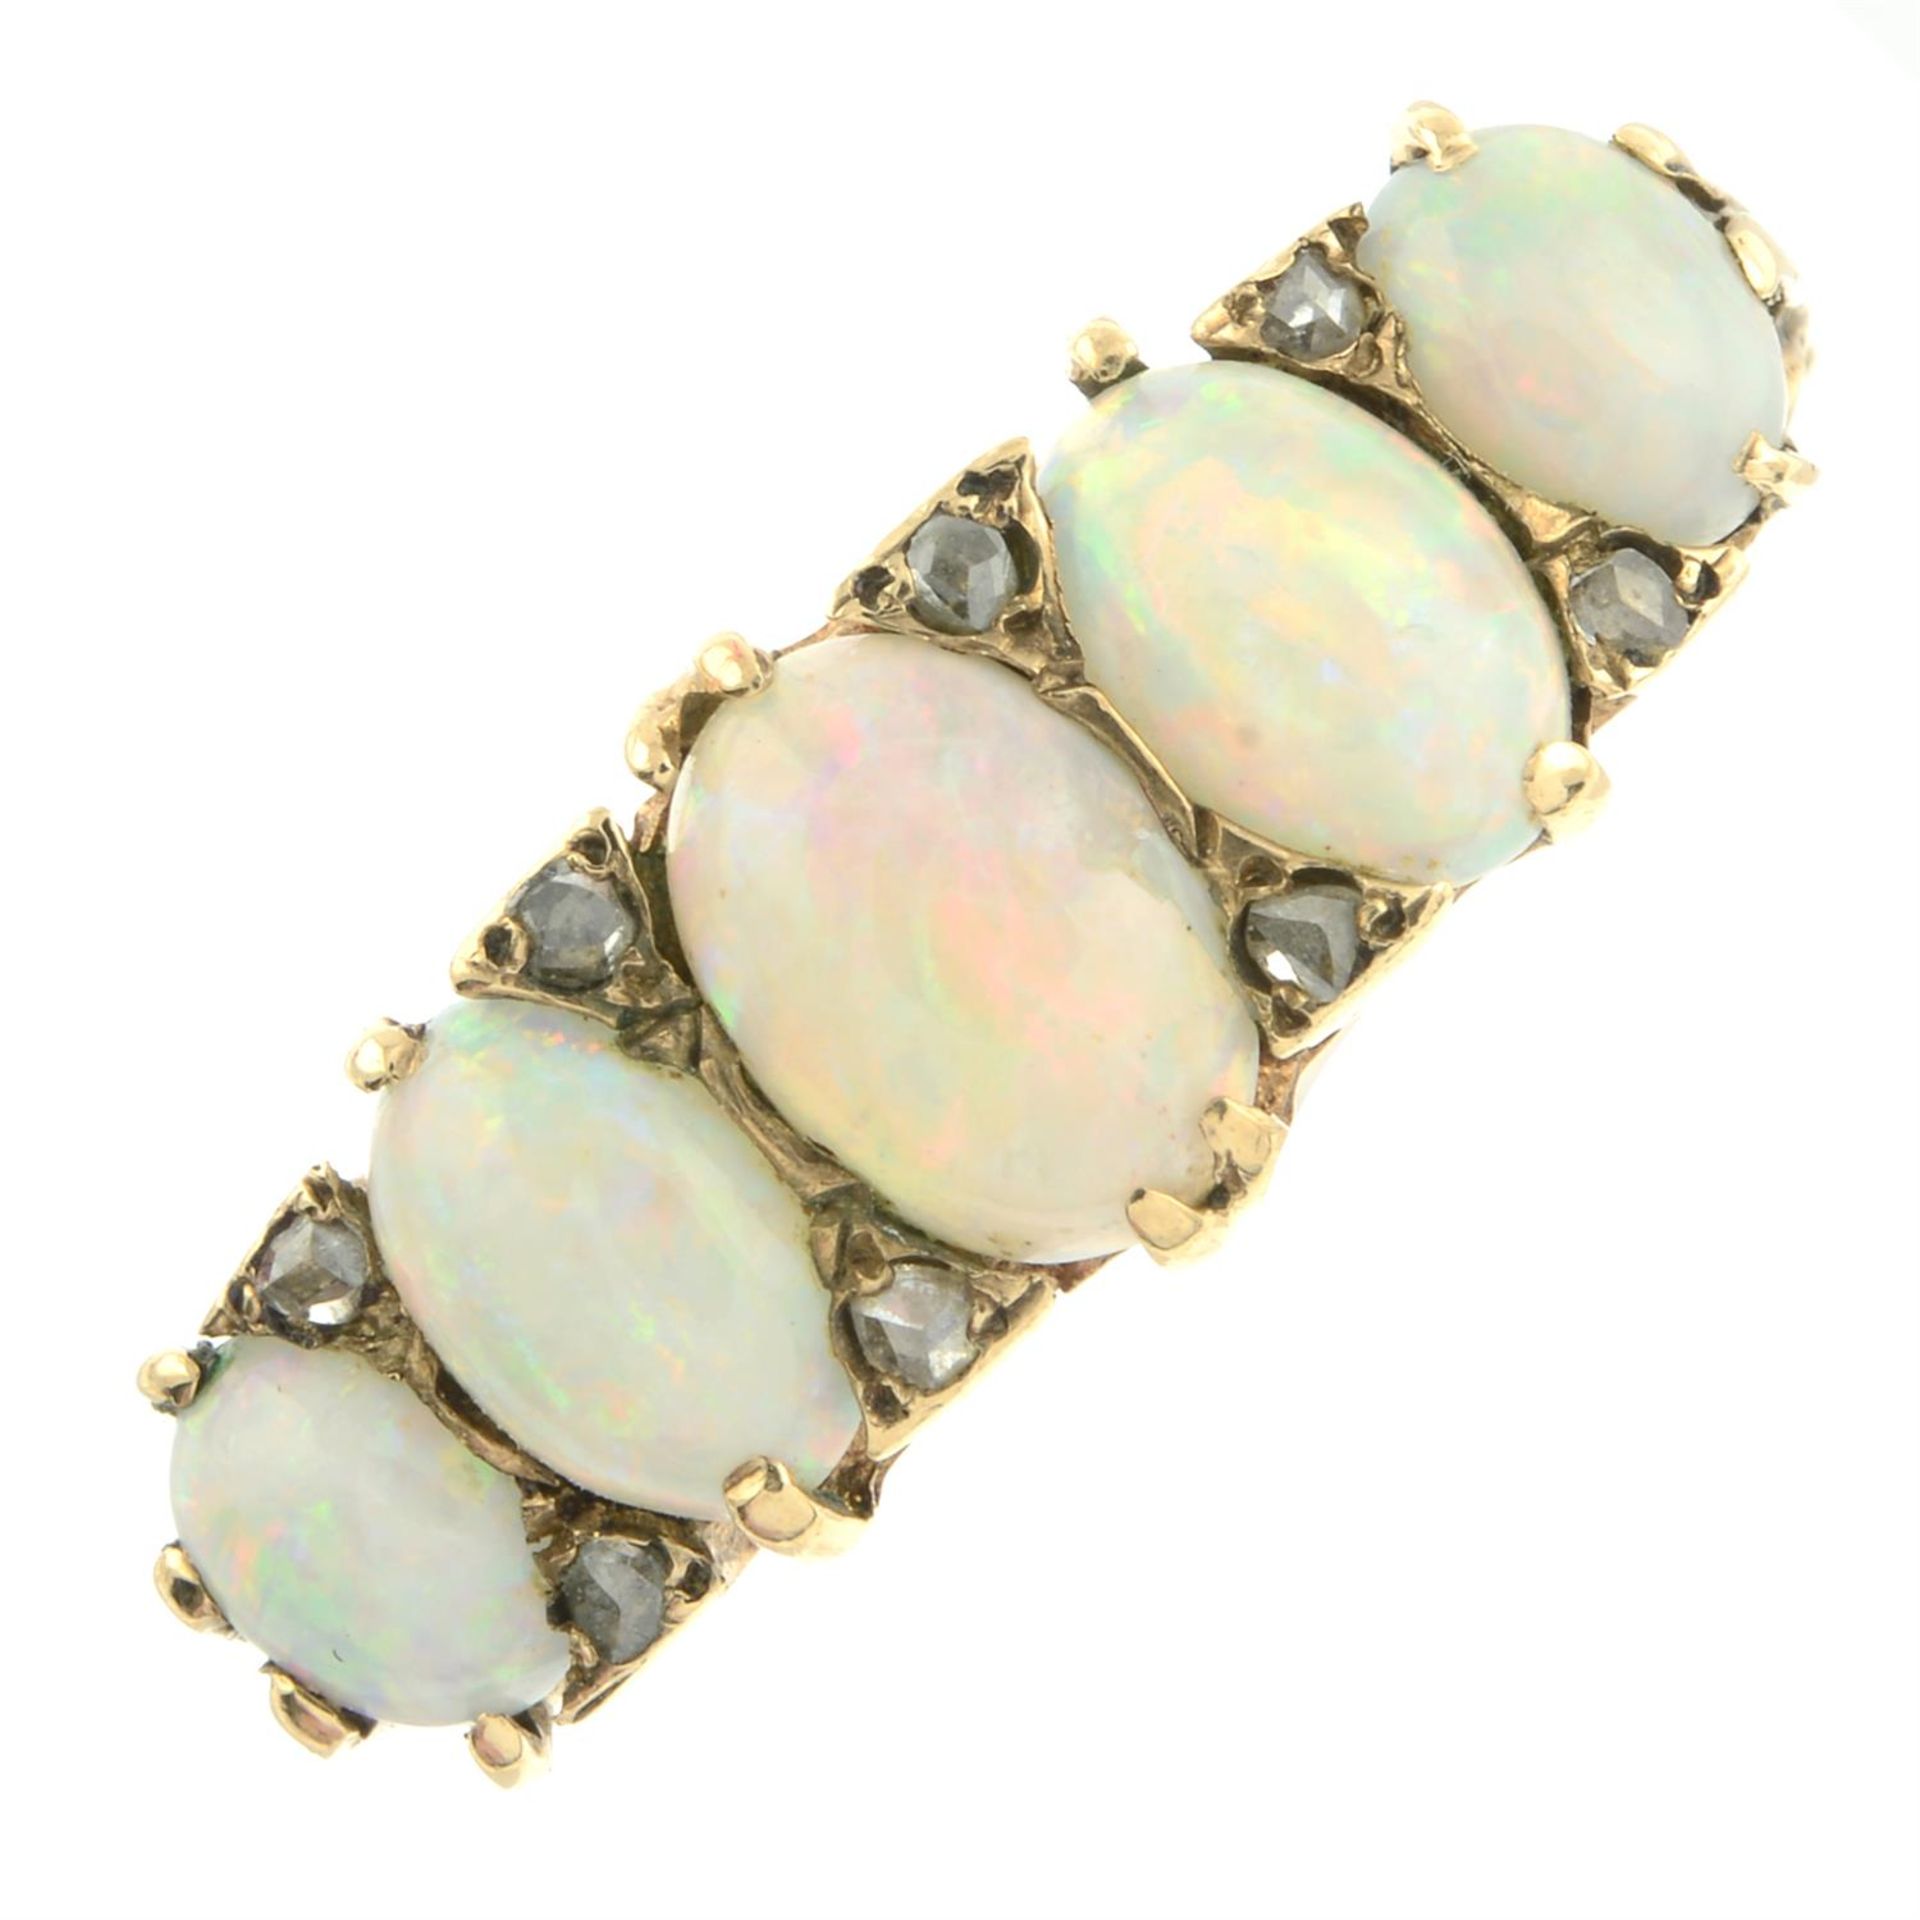 A mid 20th century 9ct gold opal five-stone ring, with rose-cut diamond spacers. - Image 2 of 5